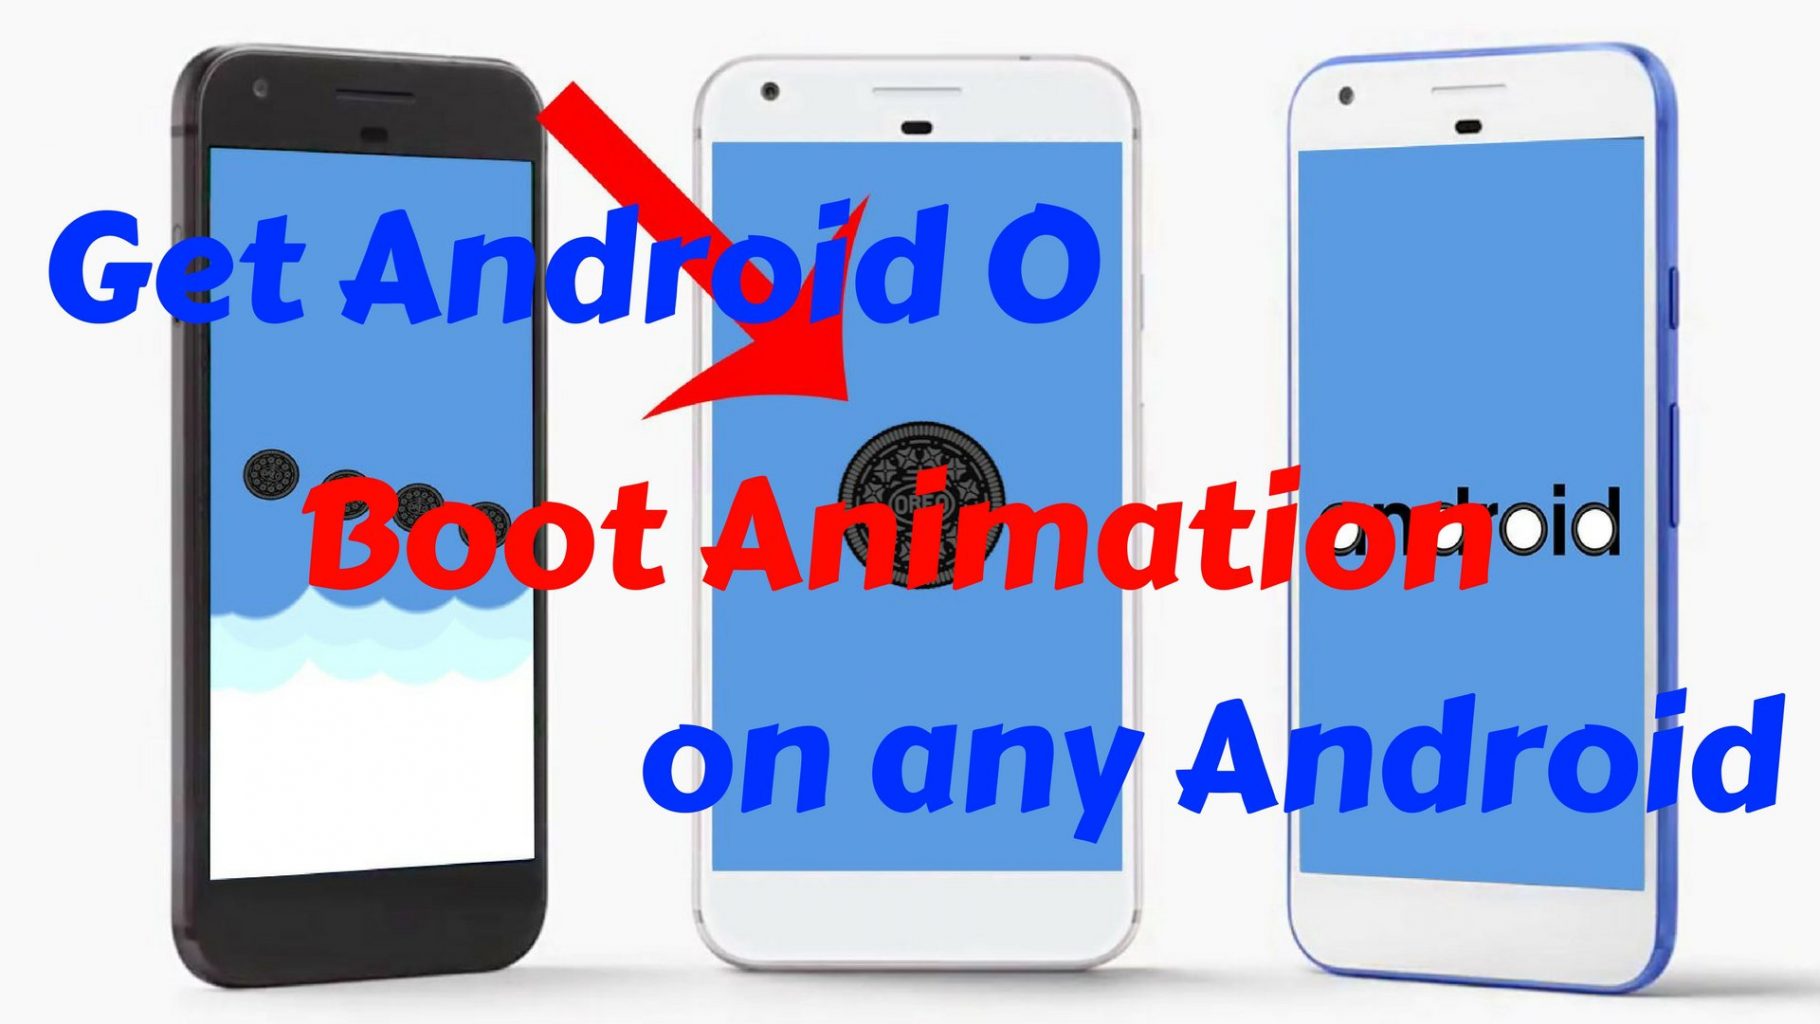 Get Android O boot animation on Any Android